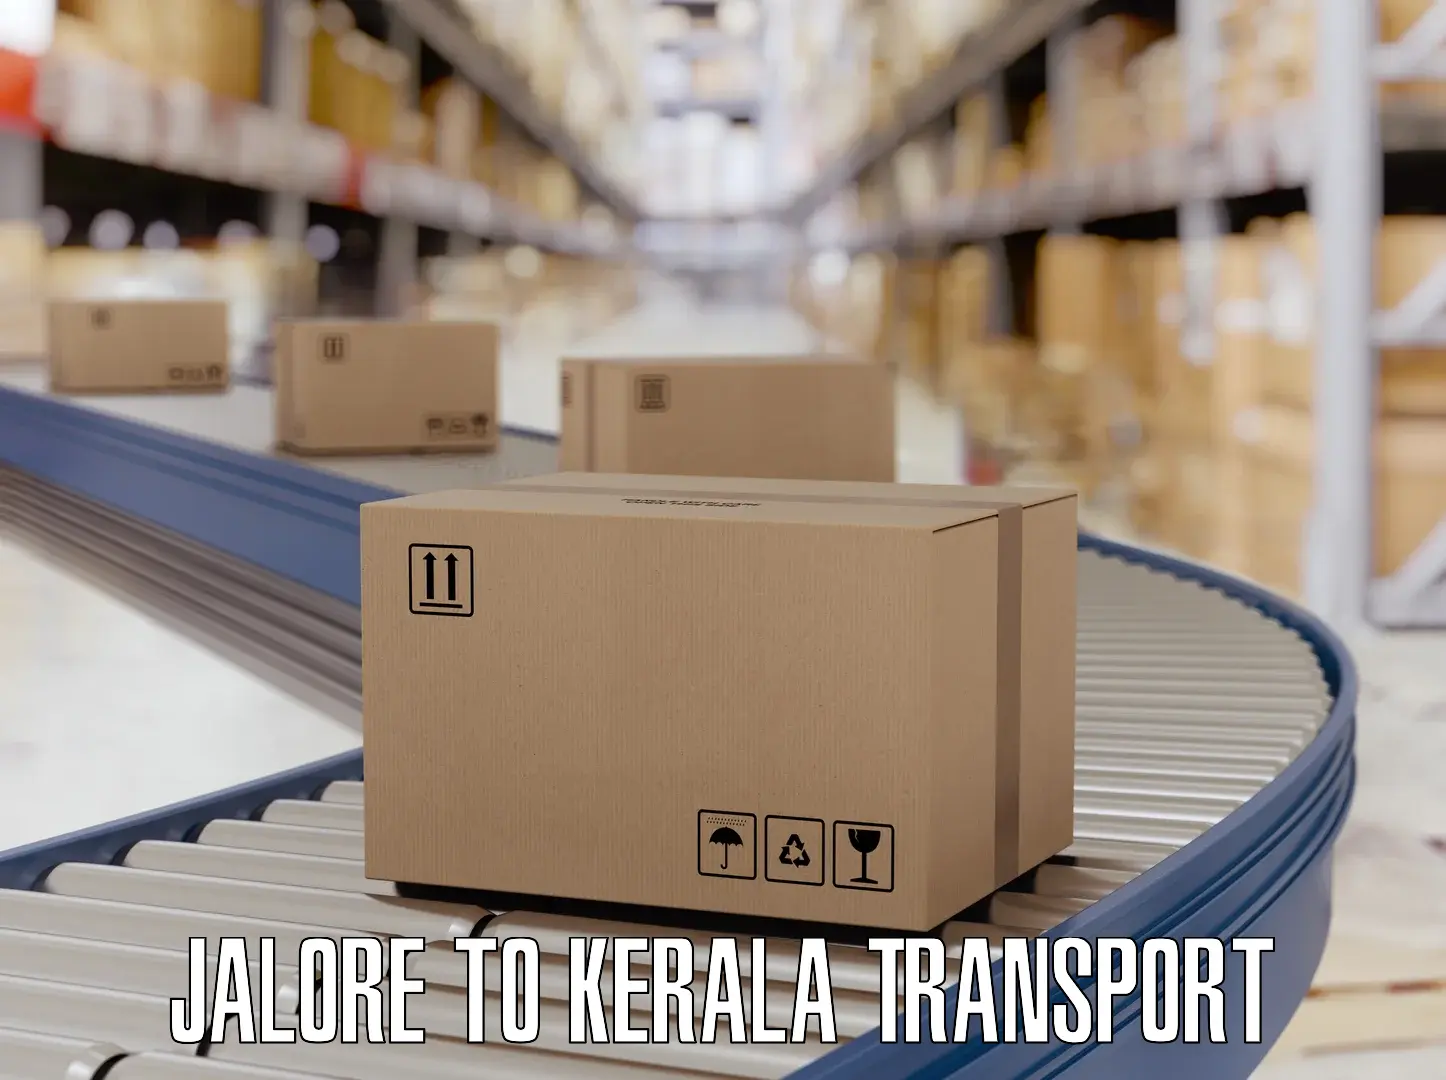 Luggage transport services Jalore to Kerala